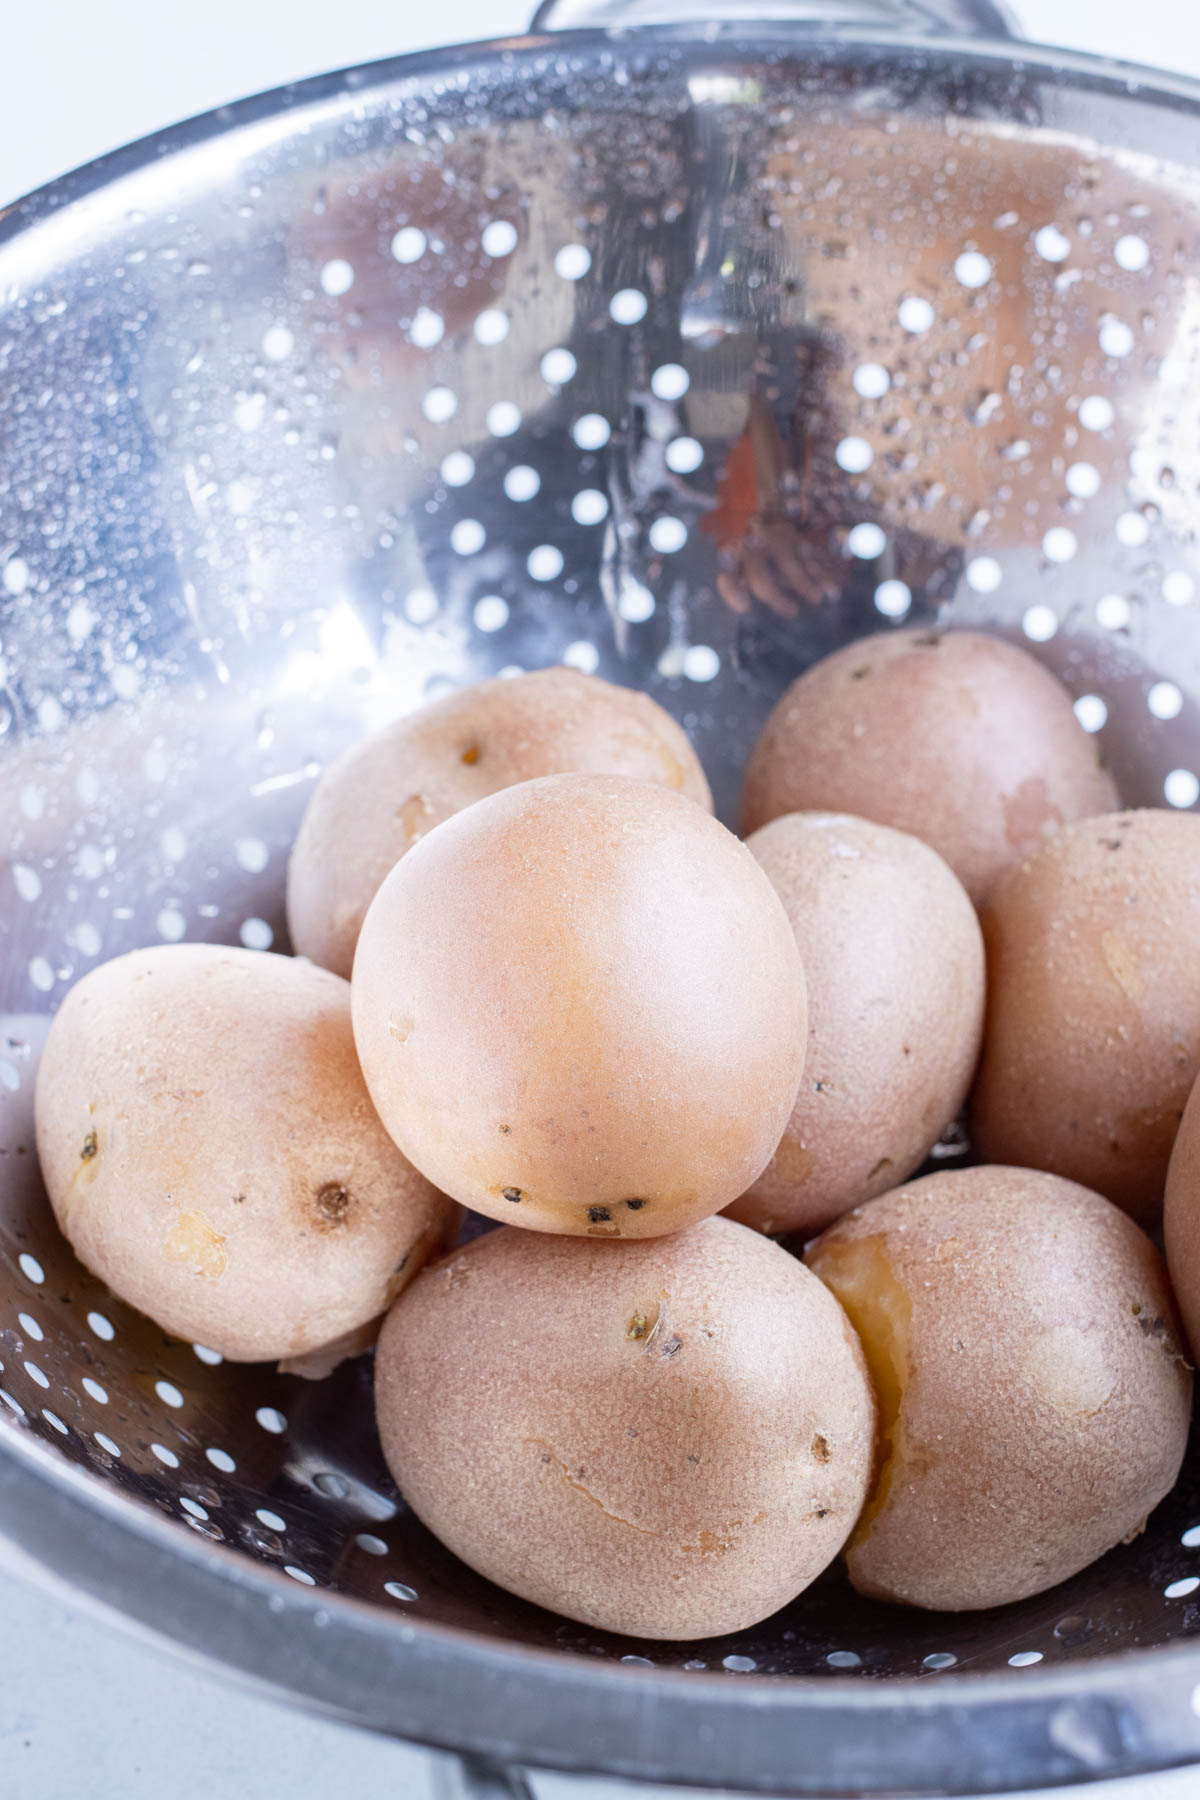 Potatoes are drained in a colander.